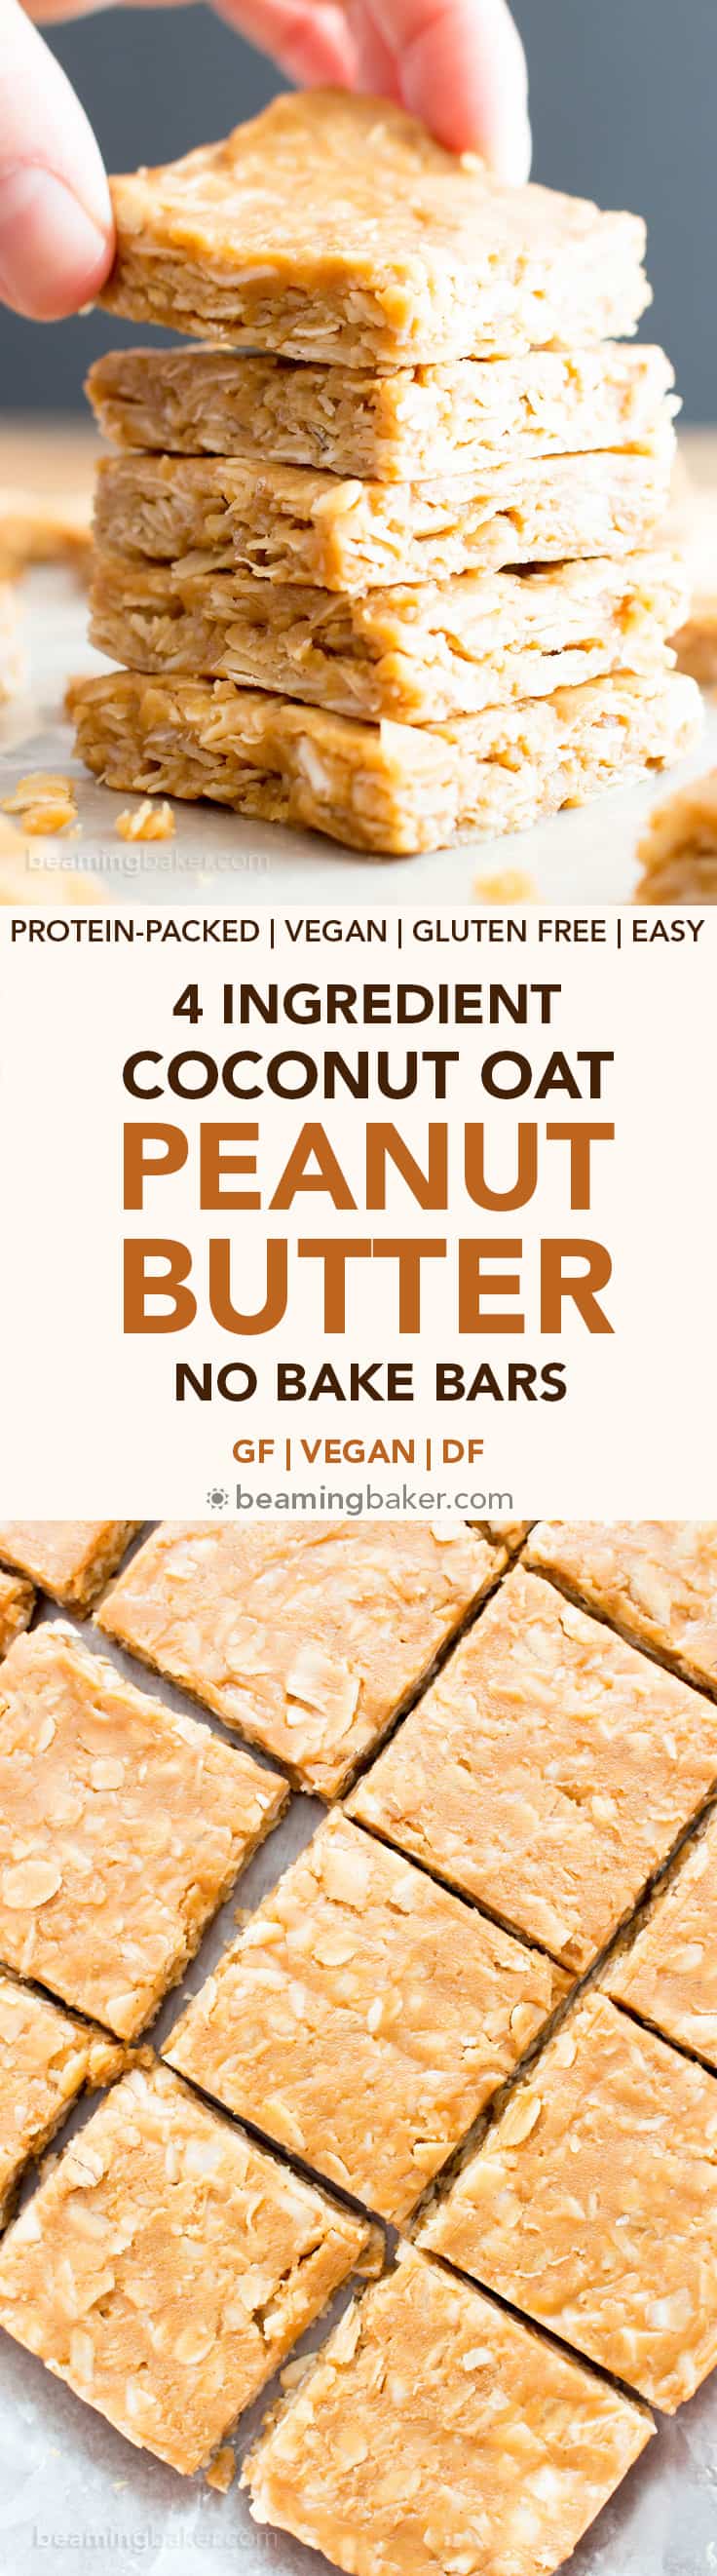 4 Ingredient No Bake Peanut Butter Coconut Oatmeal Bars (V, GF): an easy, one bowl recipe for protein-rich, gluten-free oatmeal bars bursting with peanut butter and coconut. #Vegan #GlutenFree #DairyFree #HealthySnacks #ProteinRich #RefinedSugarFree #PlantBased | Recipe on BeamingBaker.com